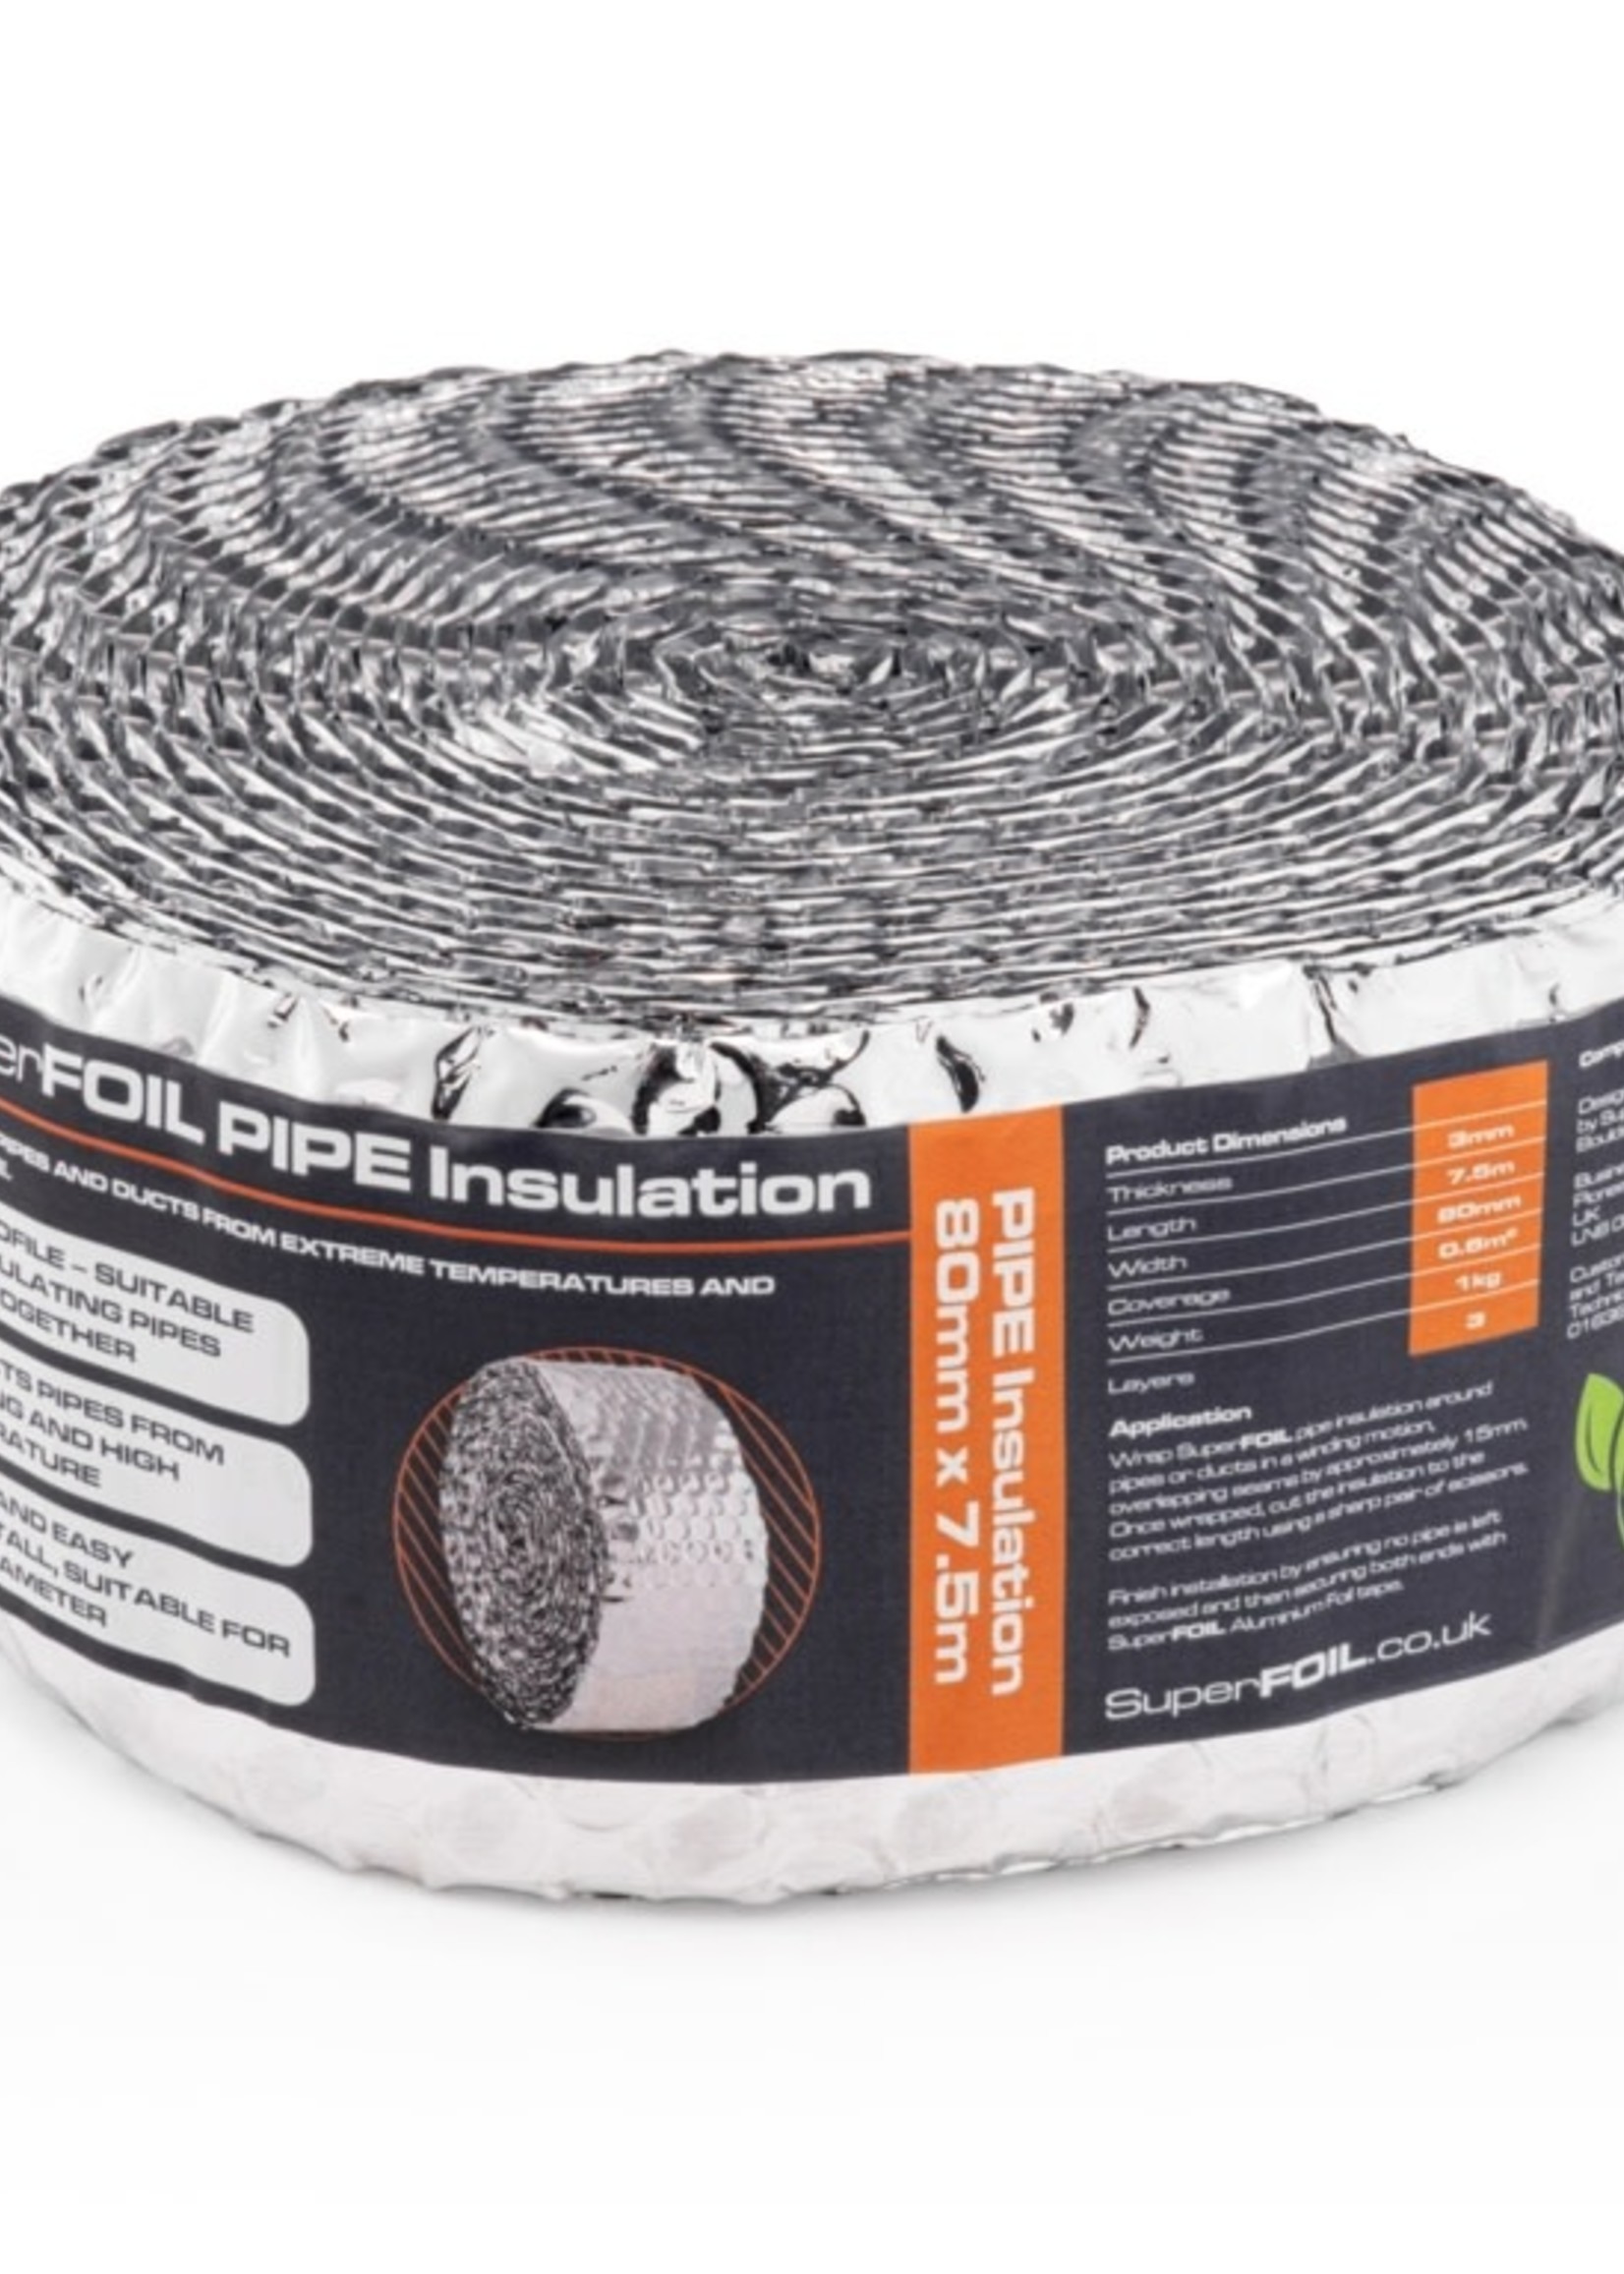 Superfoil Pipe Insulation 80mm x 7.5m